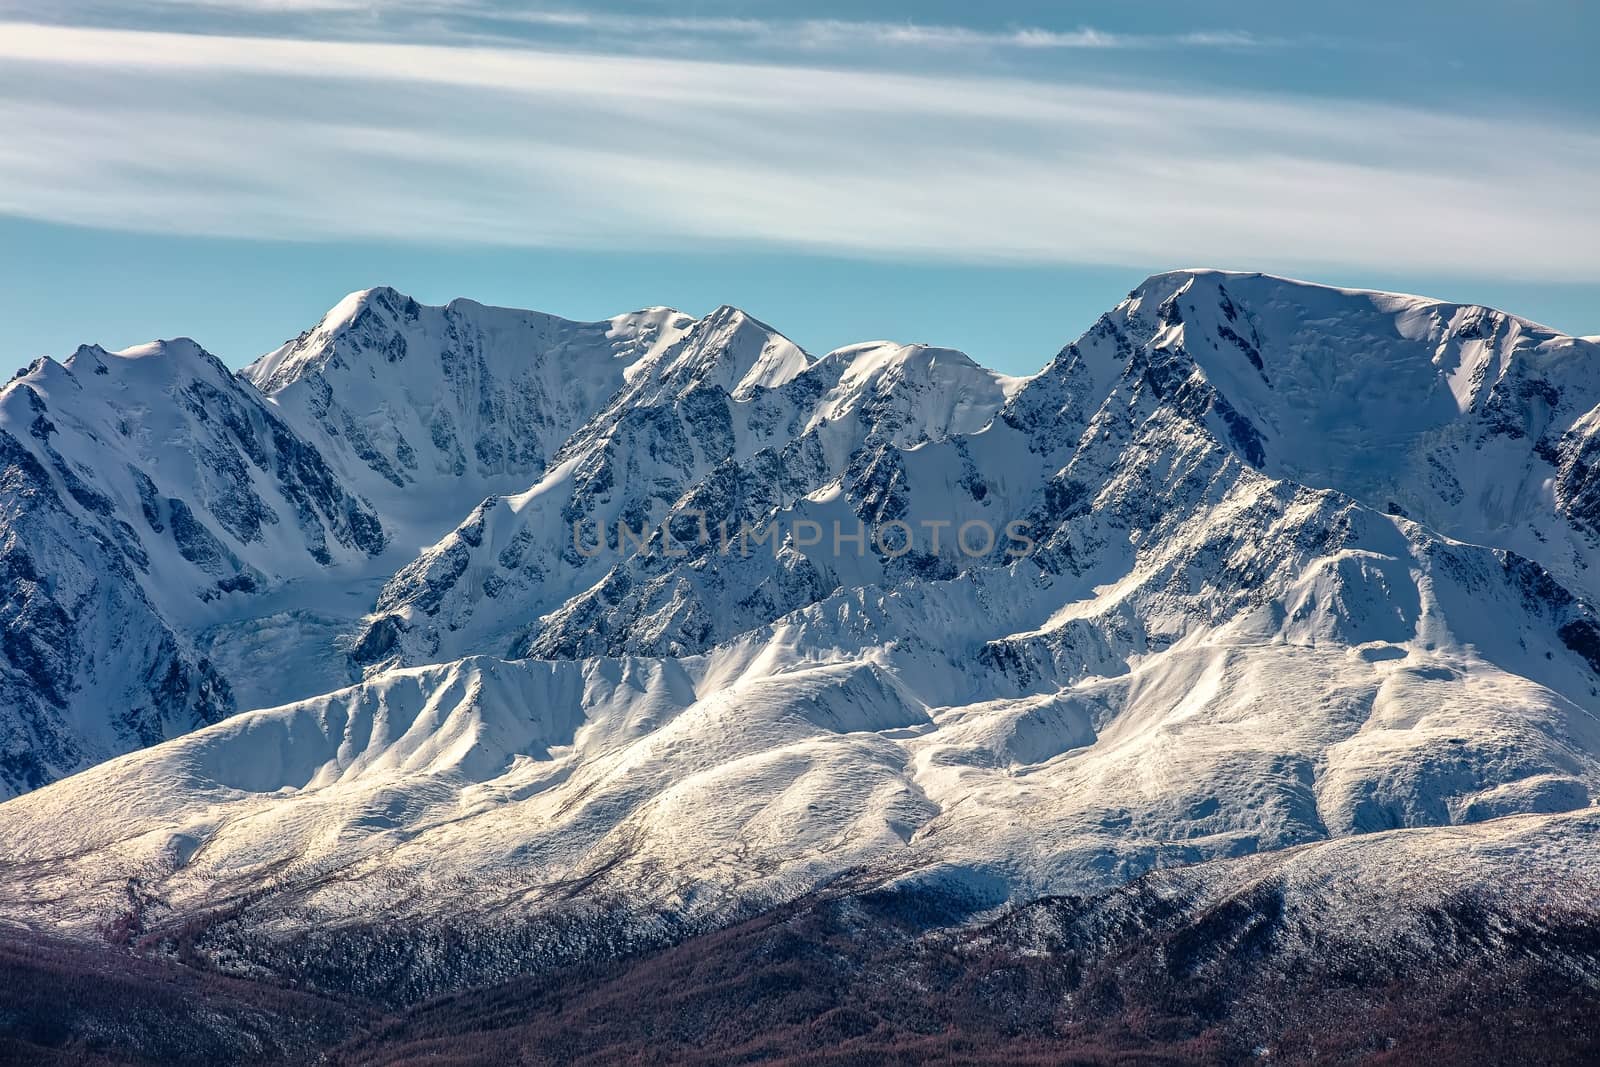 Crispy scenic view of snowy mountain peaks and cloud above them in Altai mountains, Russia. Northern Chuyskiy range. Fall 2019